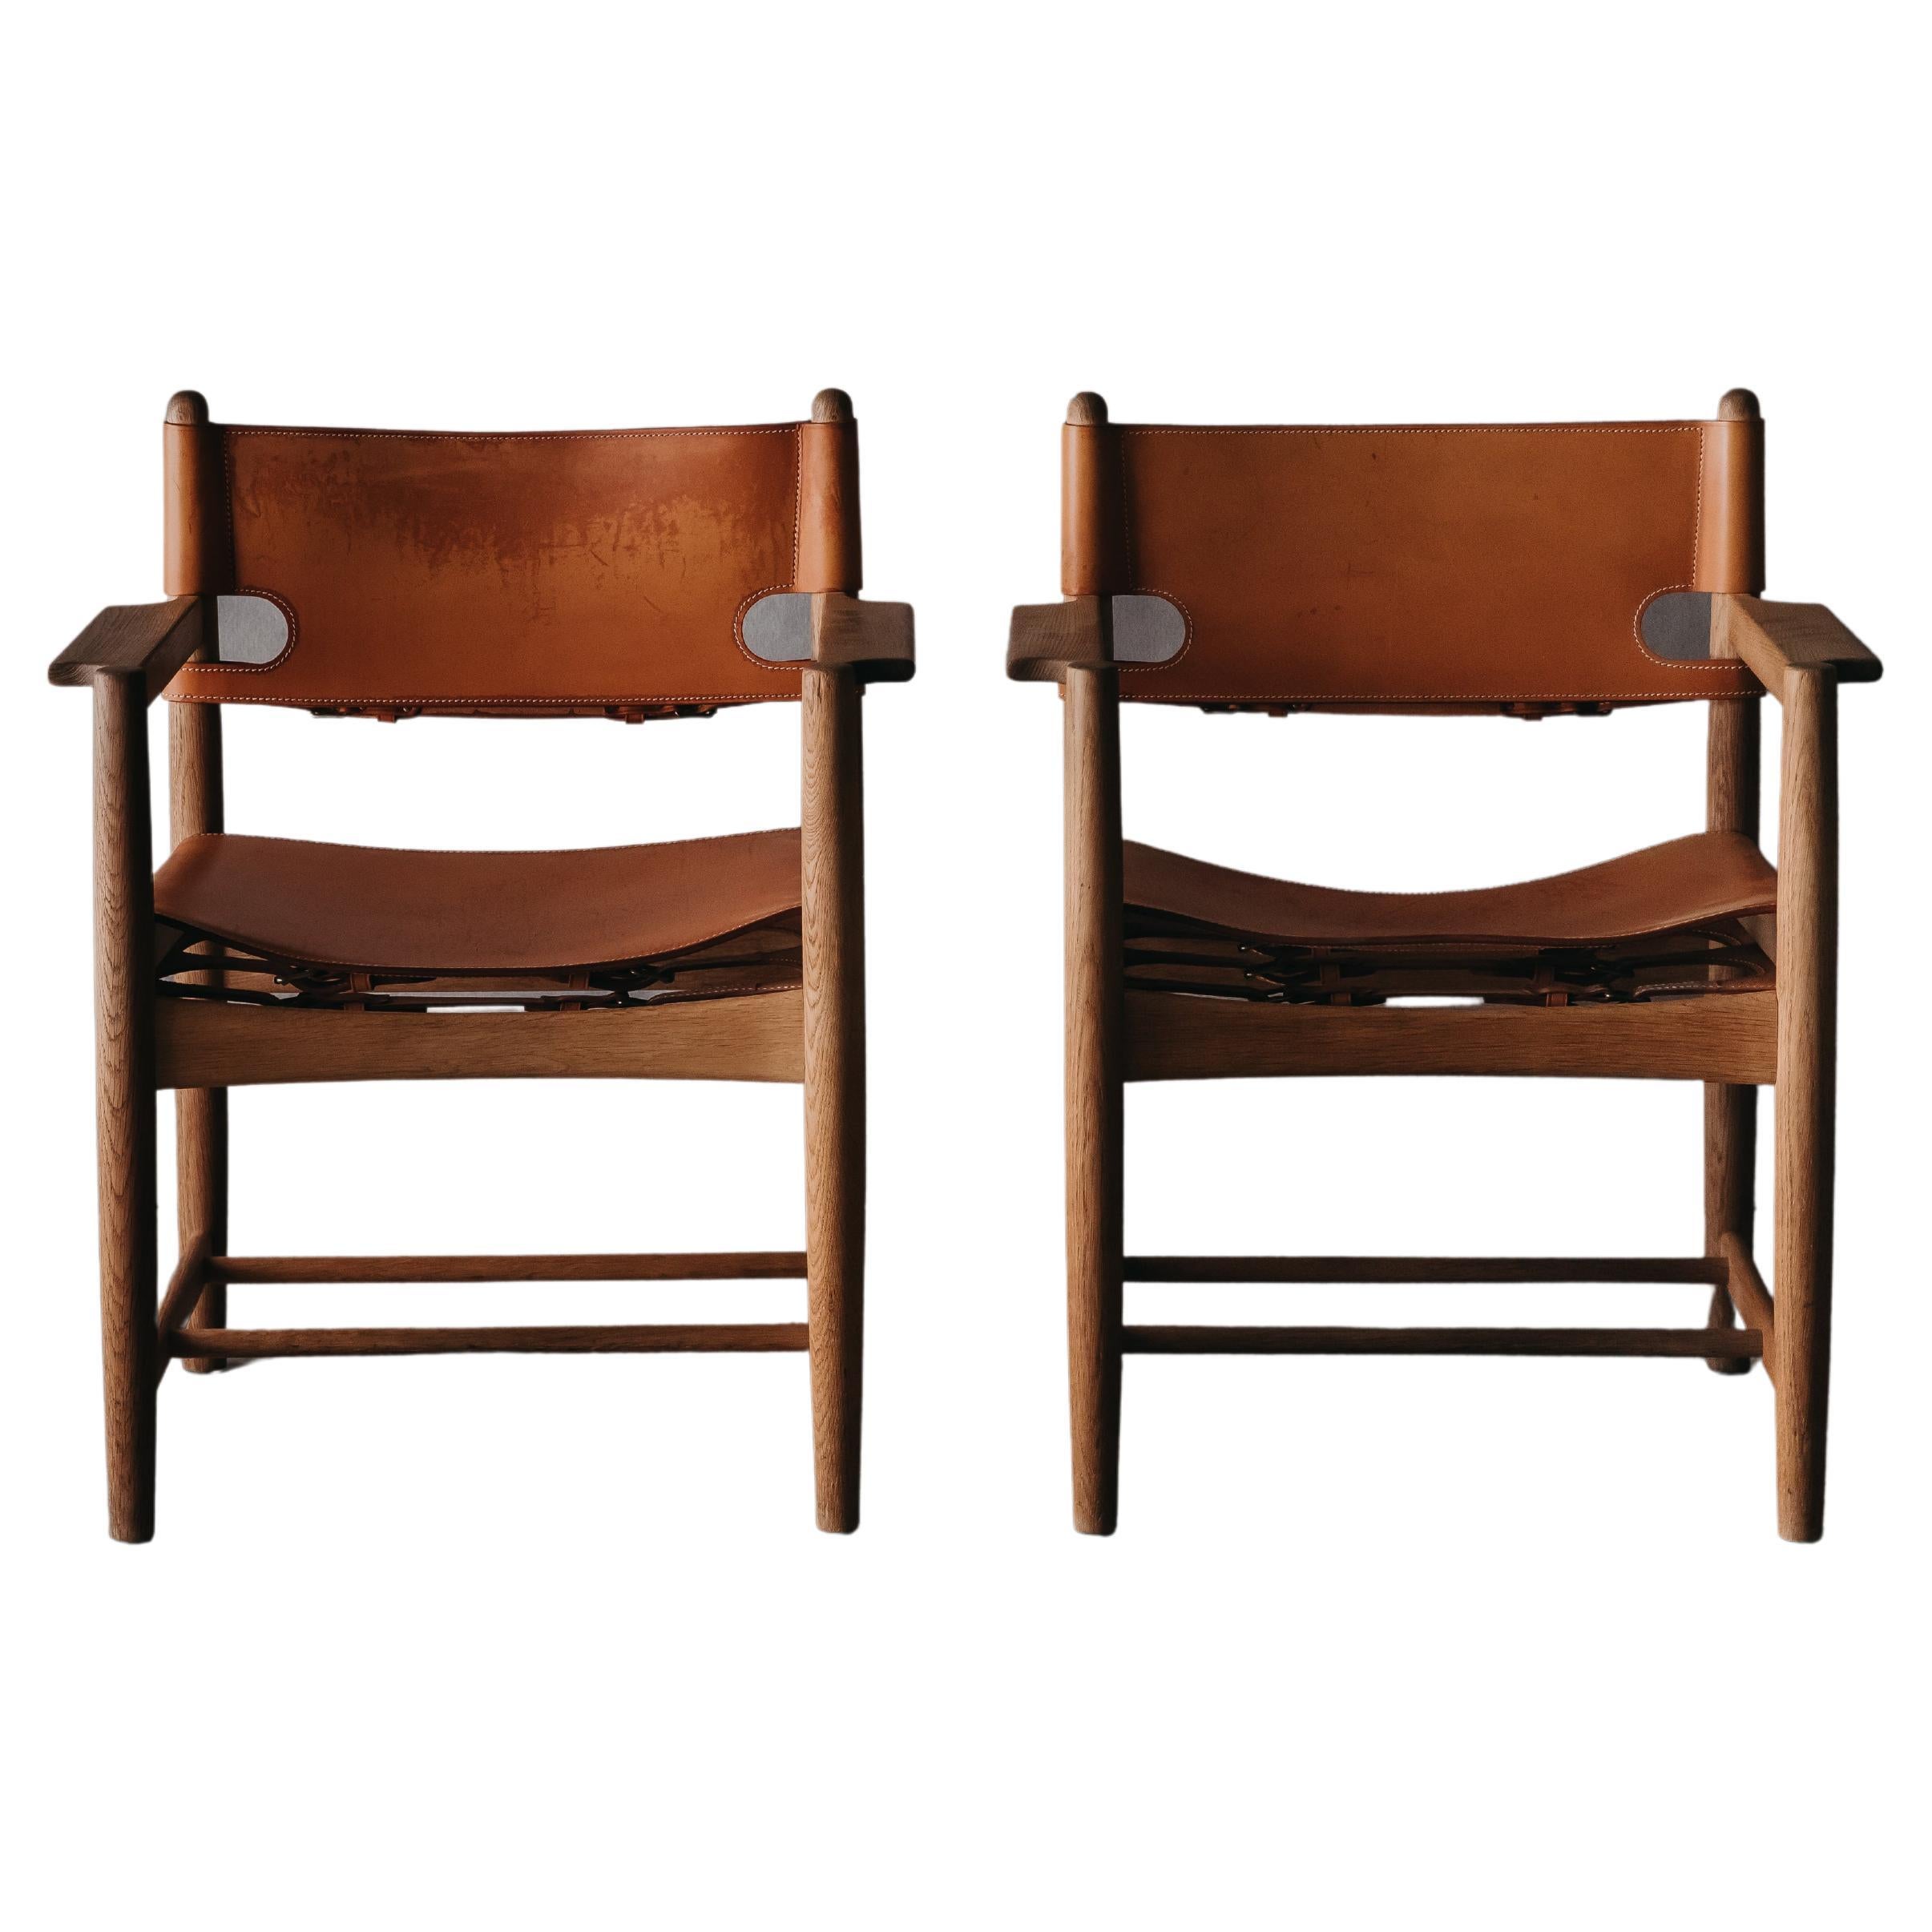 Vintage Pair of Borge Mogensen Dining Chairs from Denmark, circa 1970 For Sale